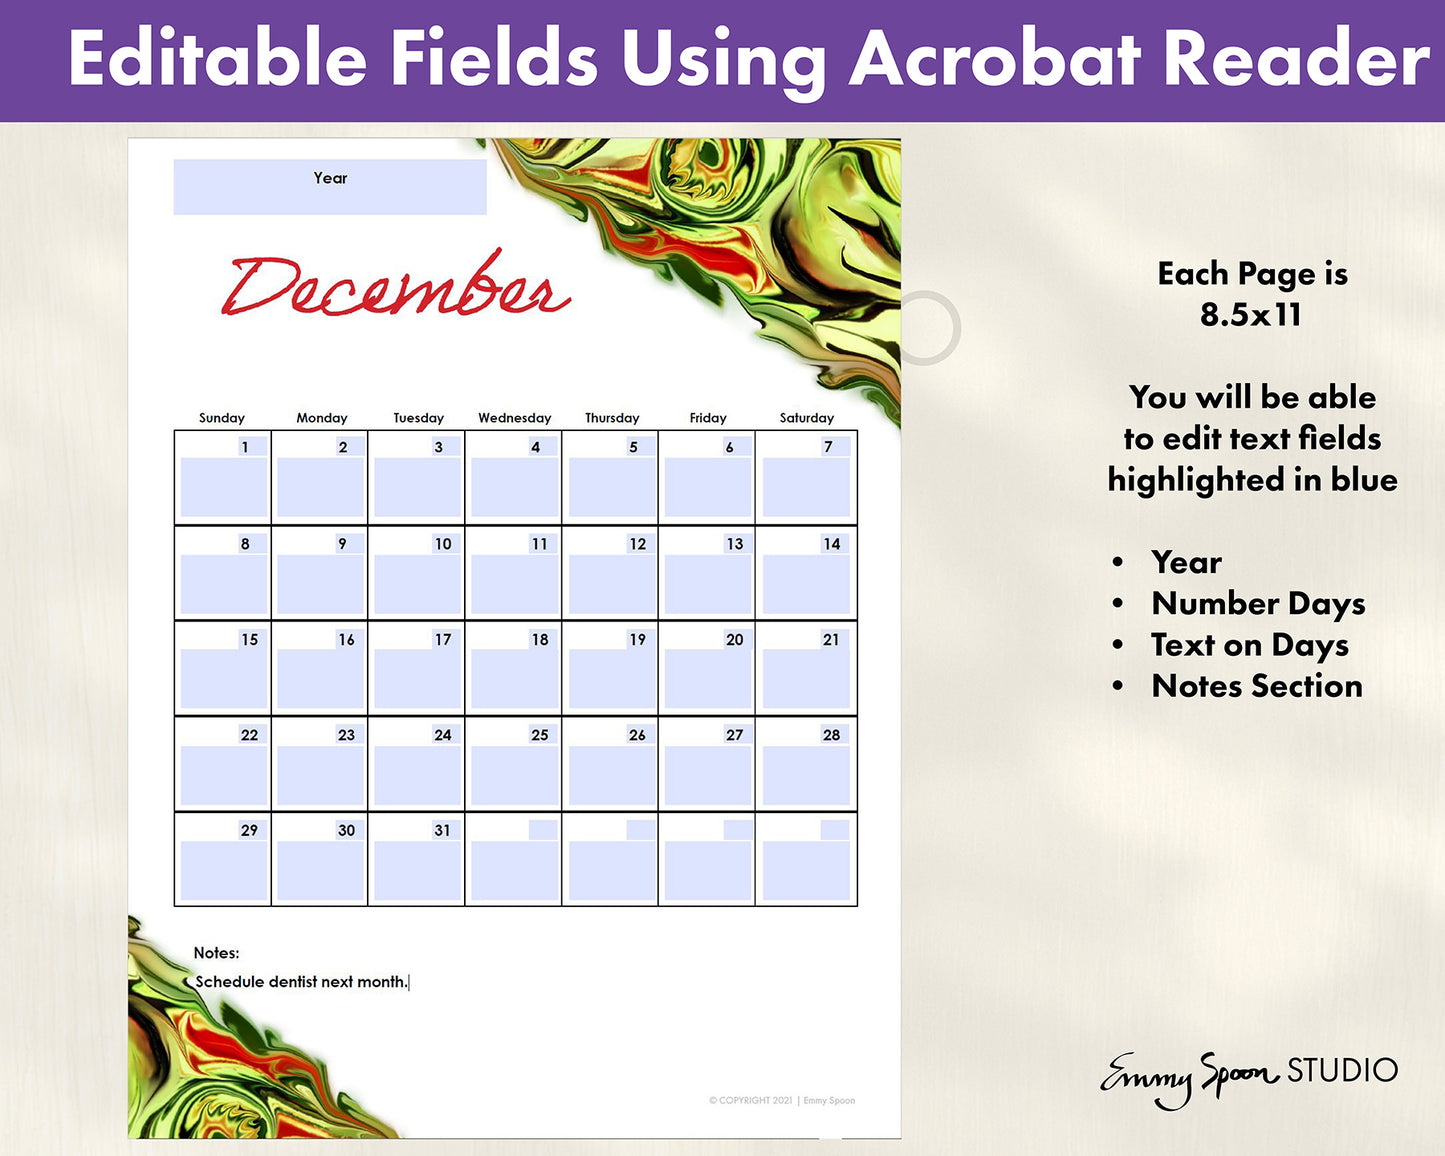 Editable Fields Using Acrobat Reader. Each page is 8.5x11. You will be able to edit text fields highlighted in blue. Year, Number Days, Text on Days, Notes Section by Emmy Spoon Studio